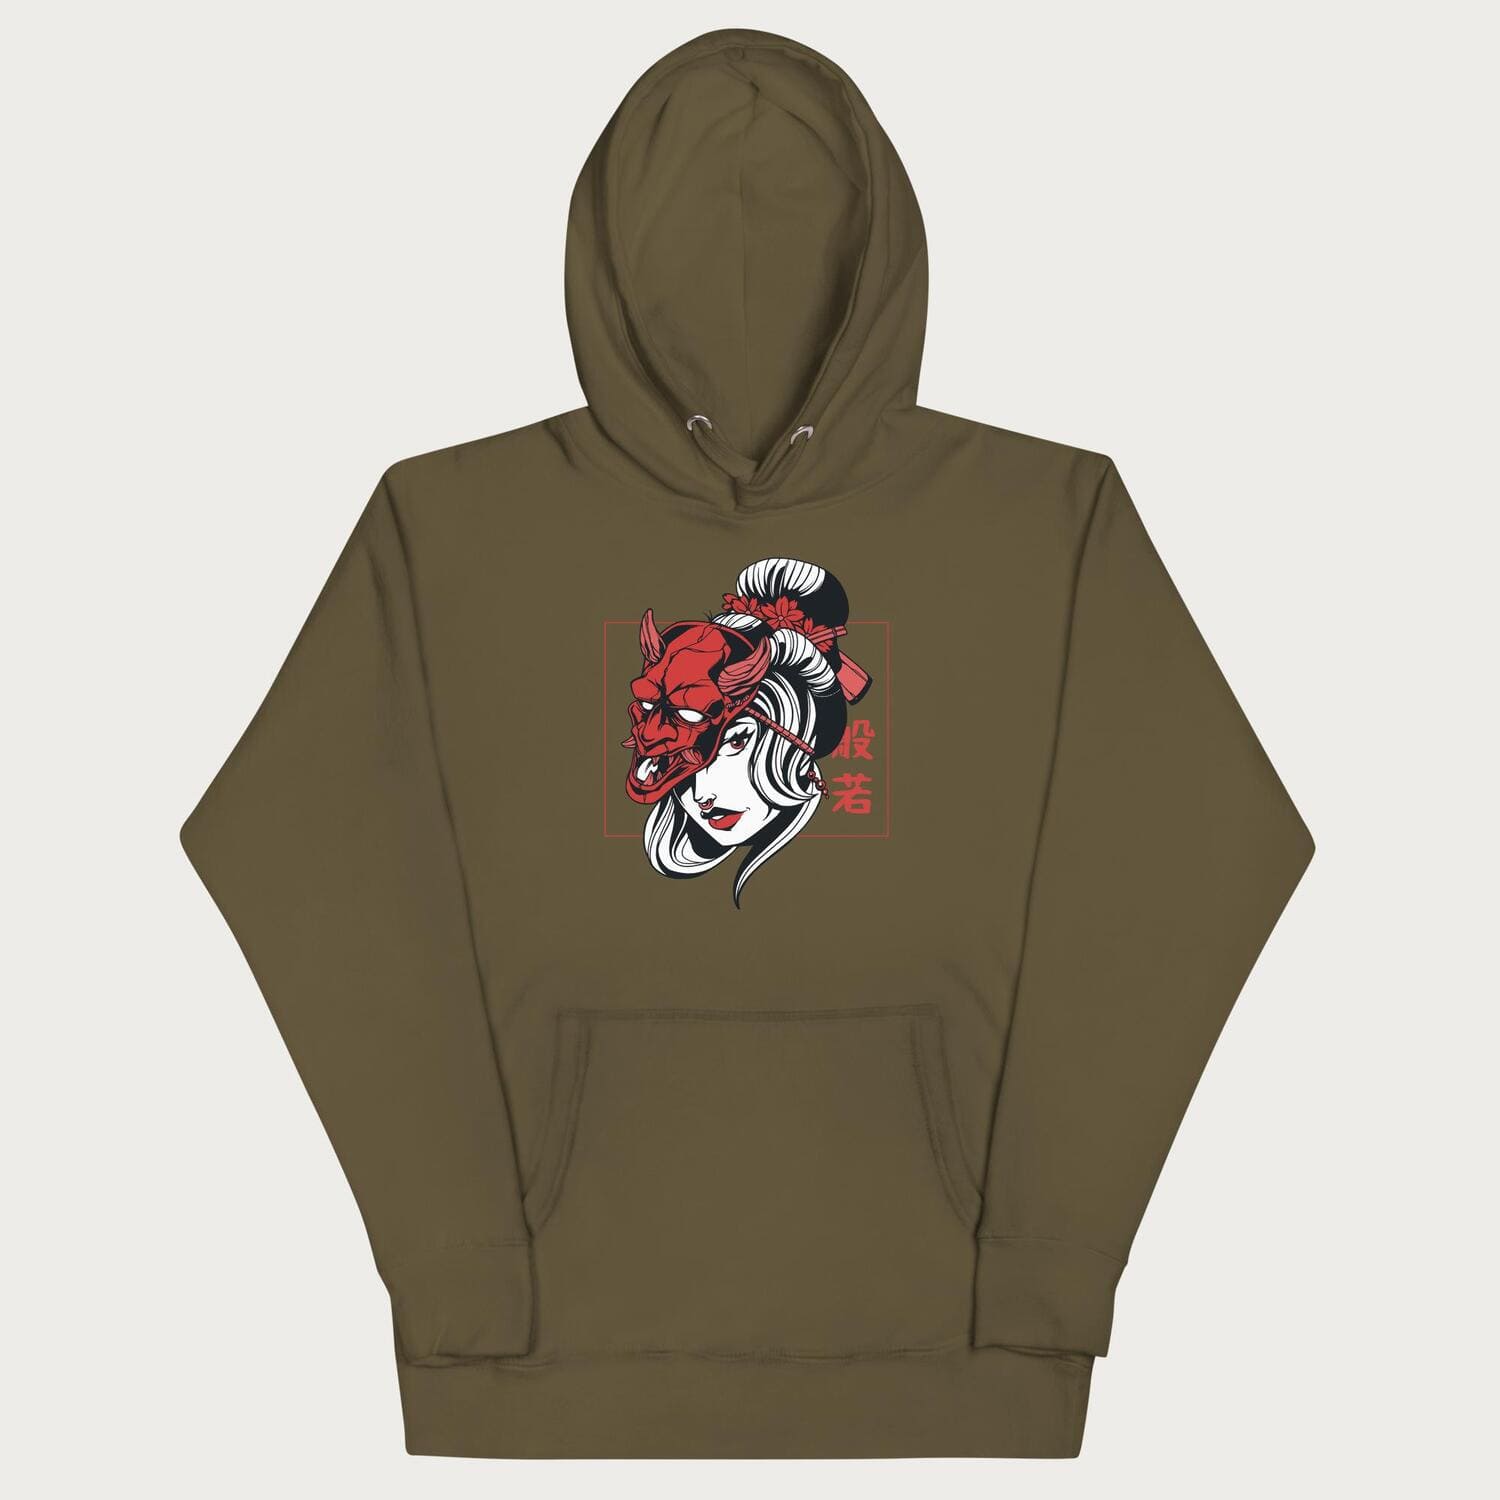 Army green hoodie with a japanese geisha and hannya mask graphic.